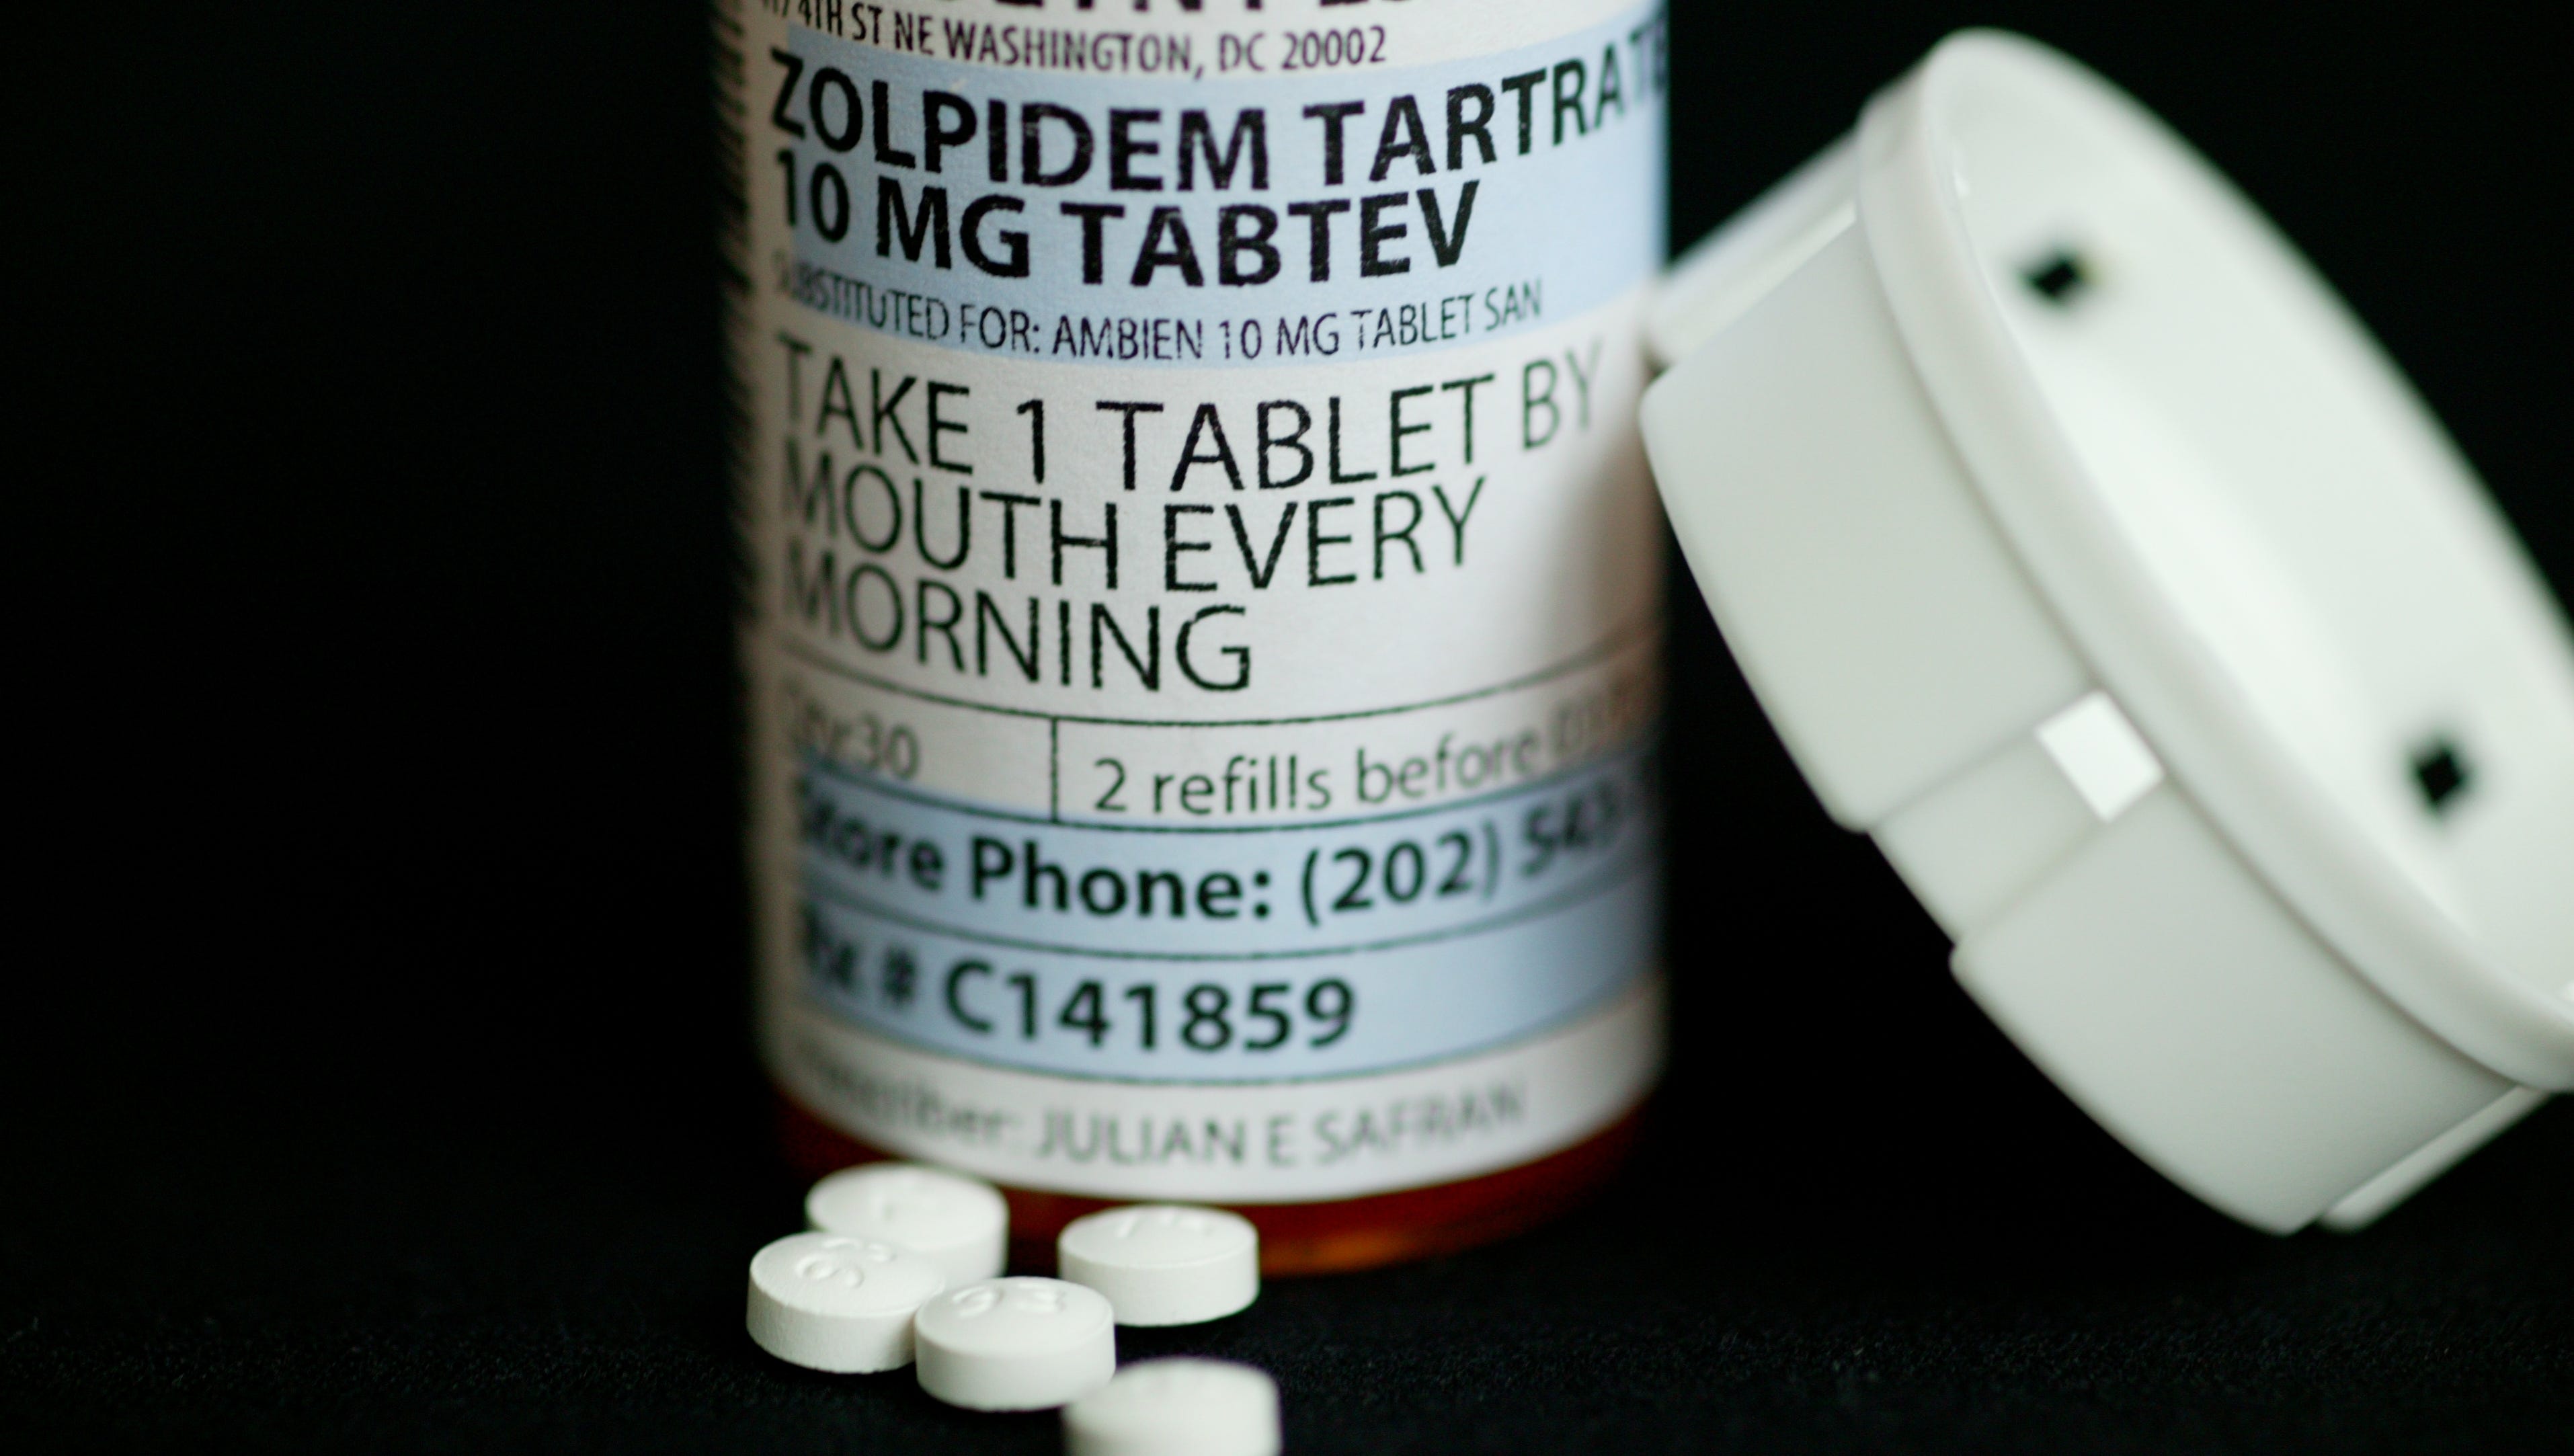 CAN TAKING ZOLPIDEM CAUSE ED